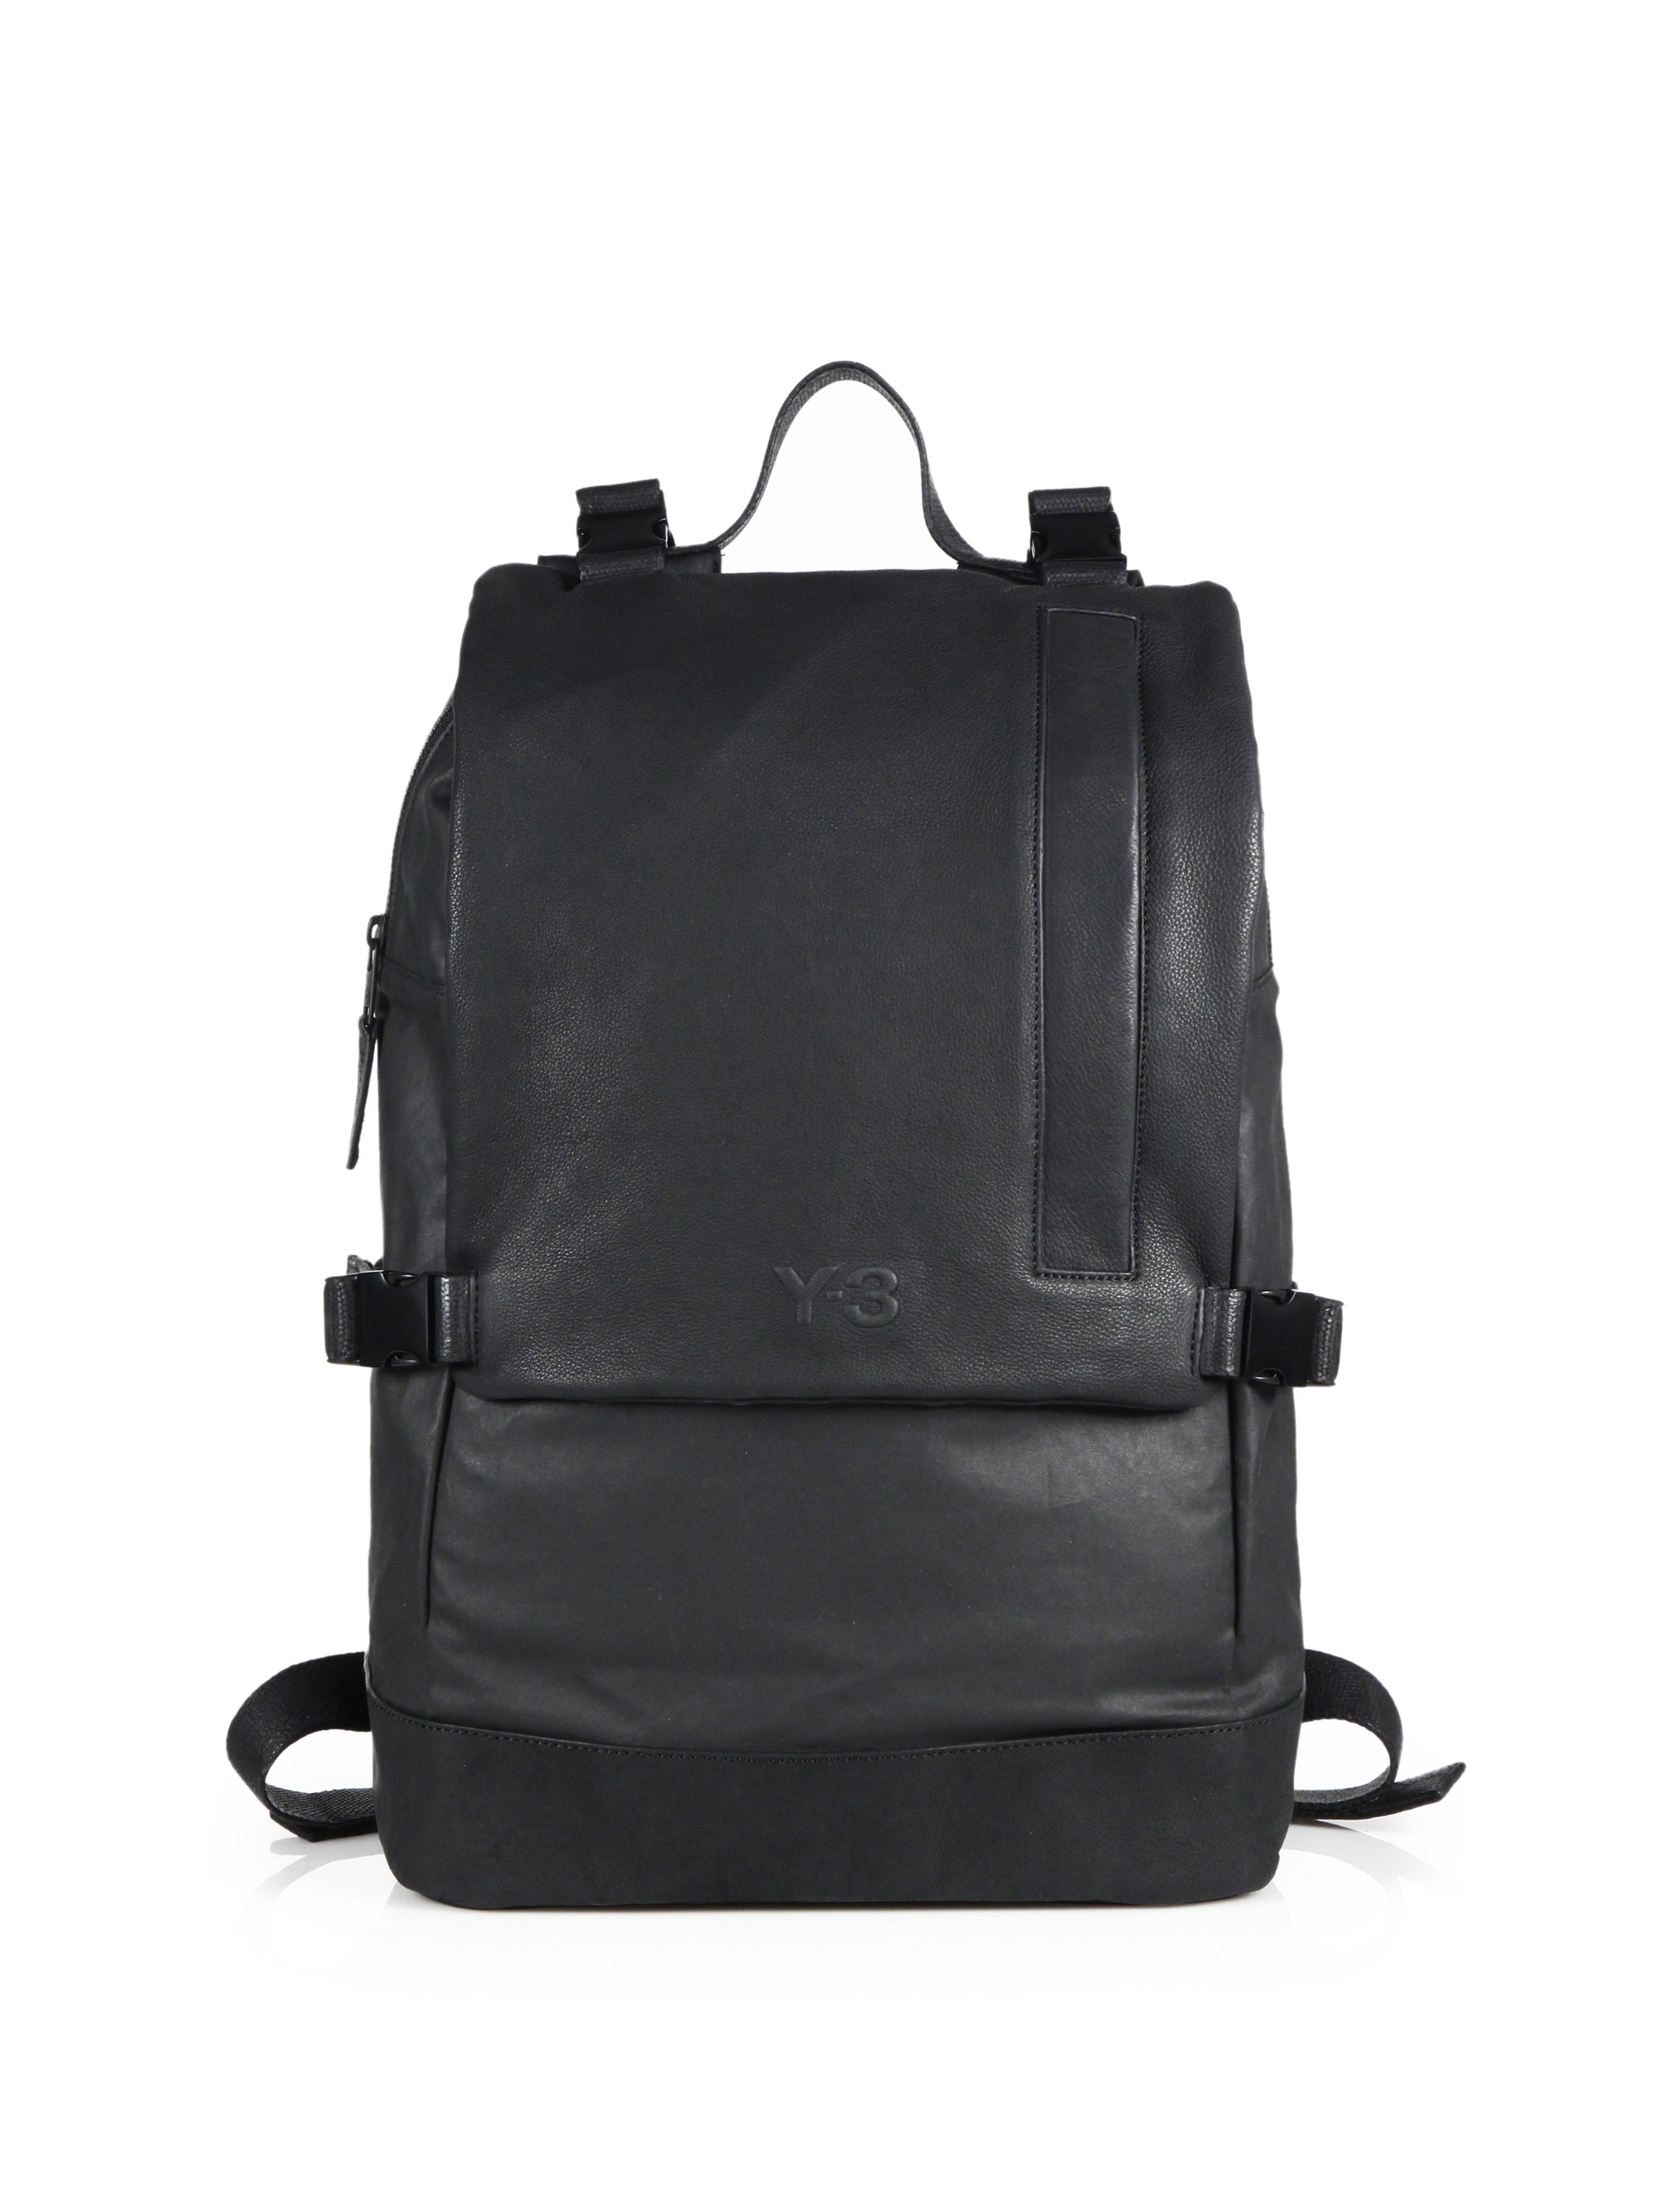 Canvas Leather Backpack Small | IUCN Water